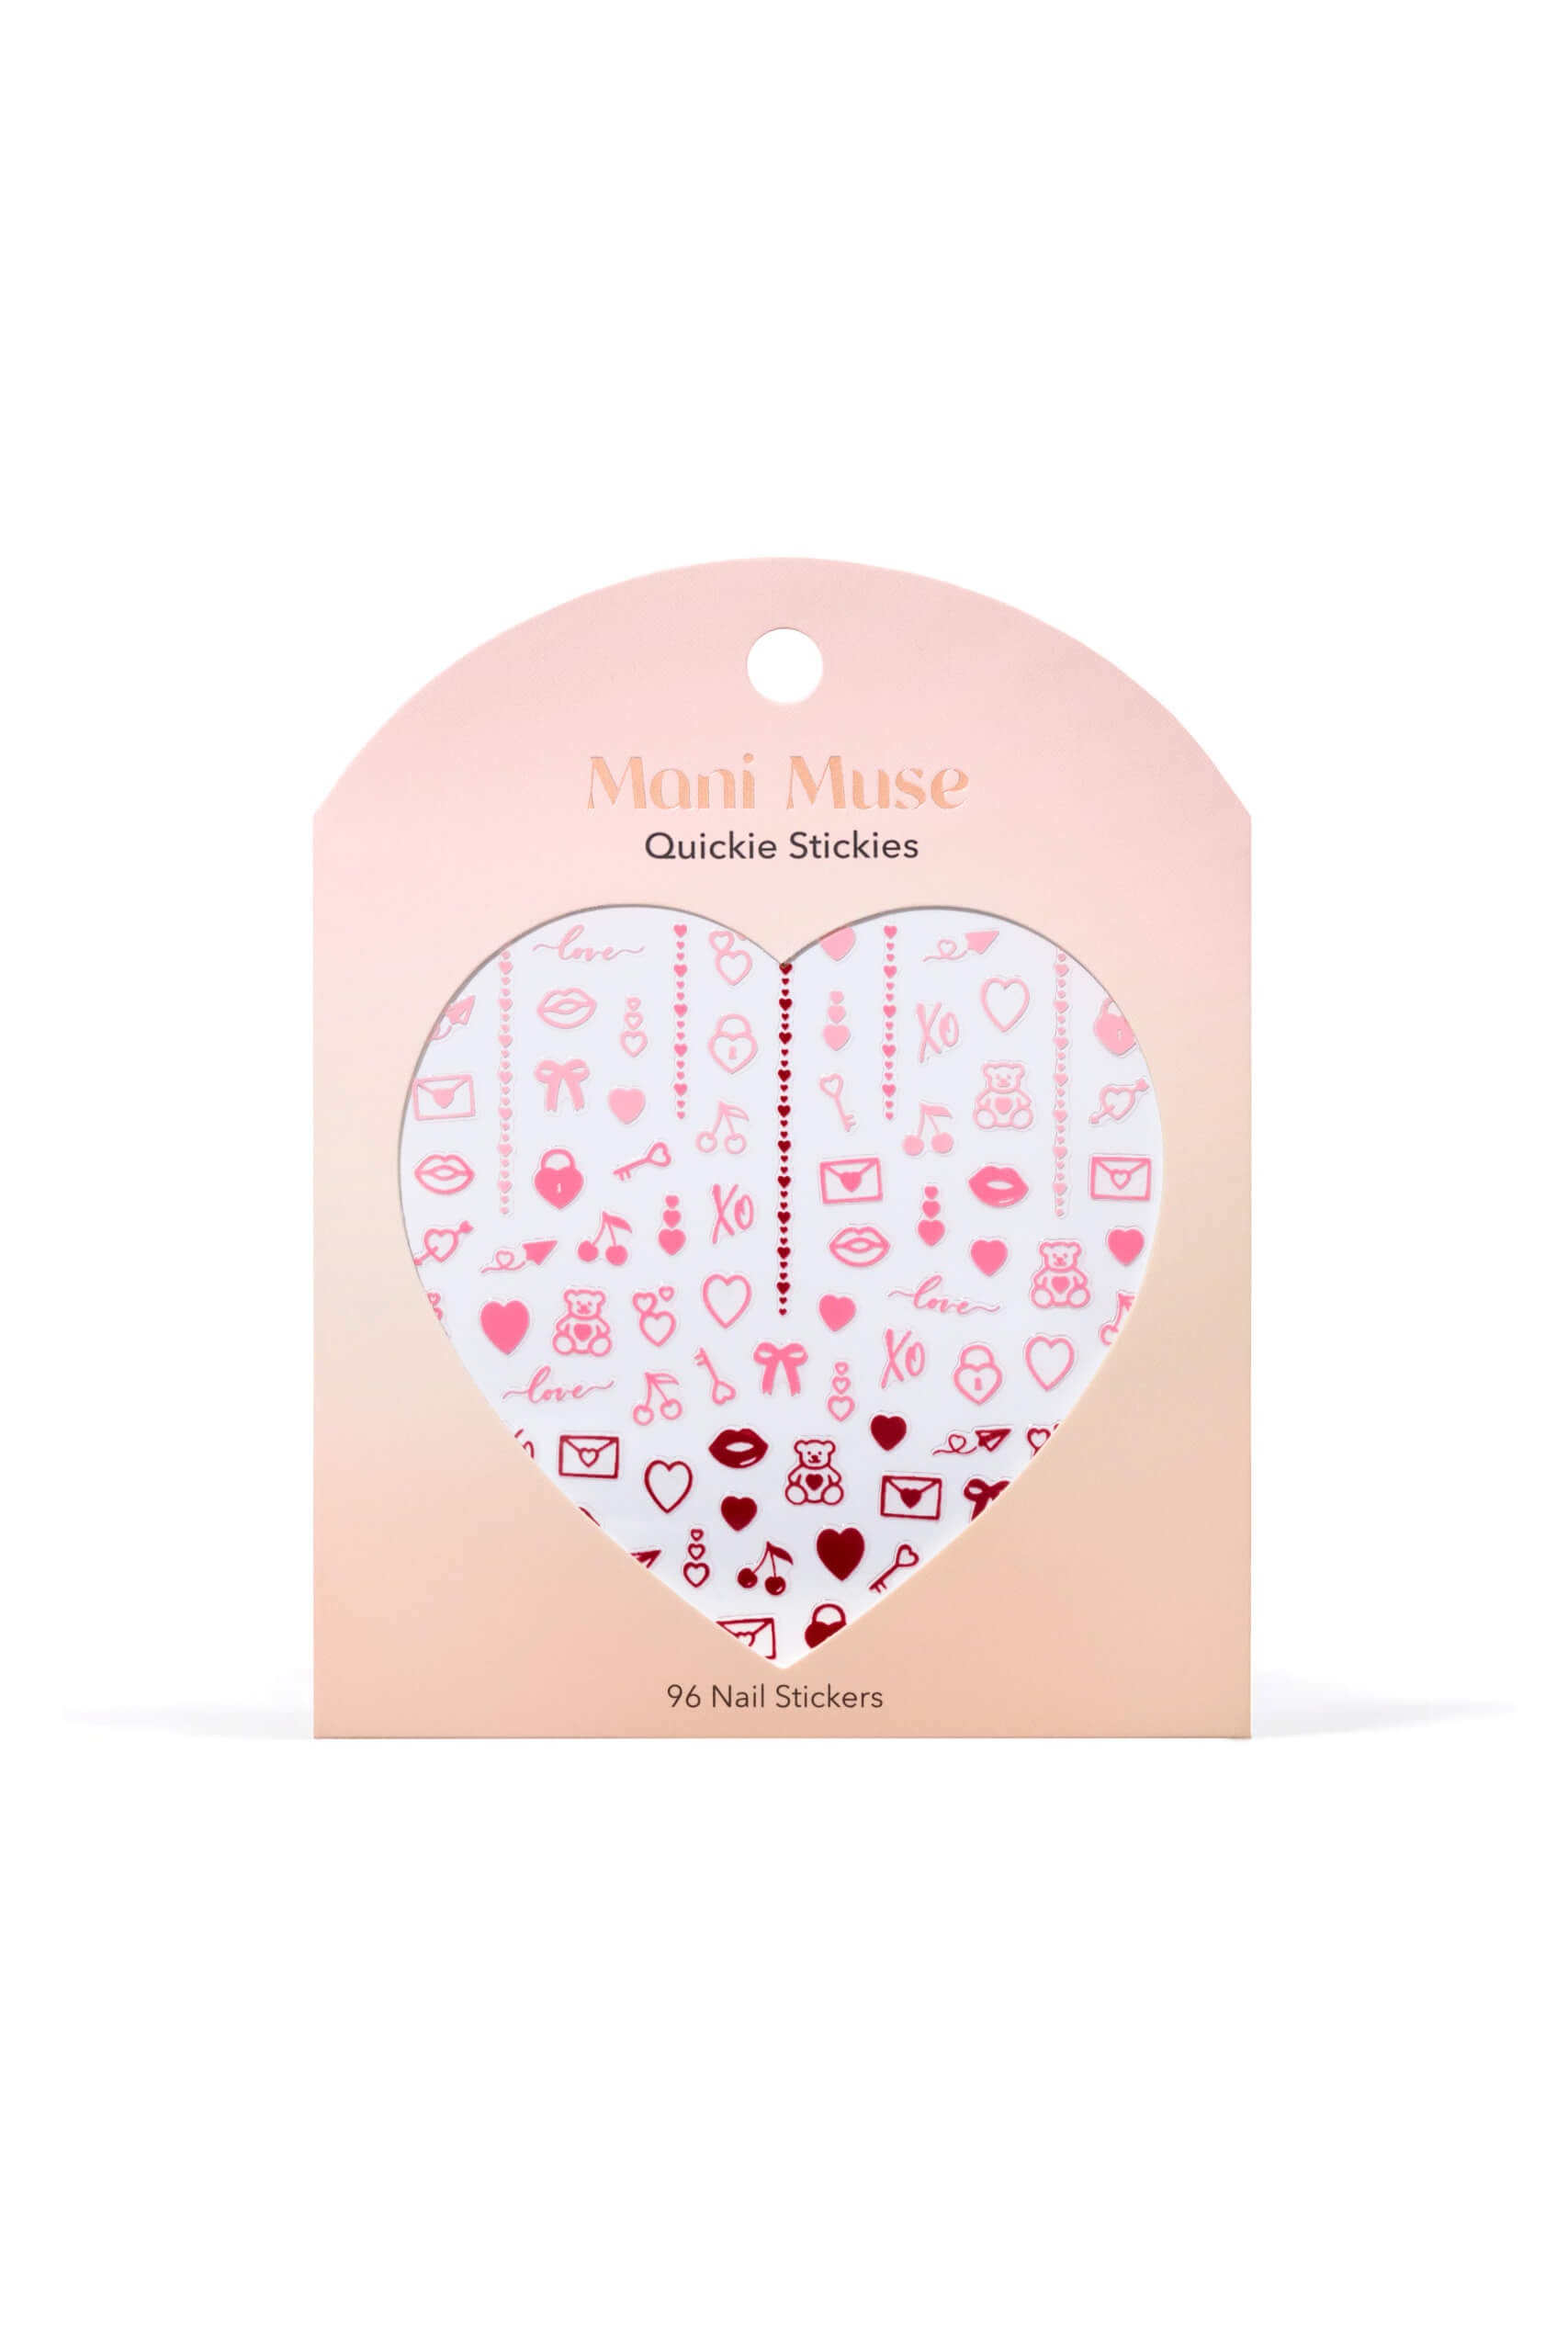 Smitten Mittens Nail Stickers E-Commerce Image